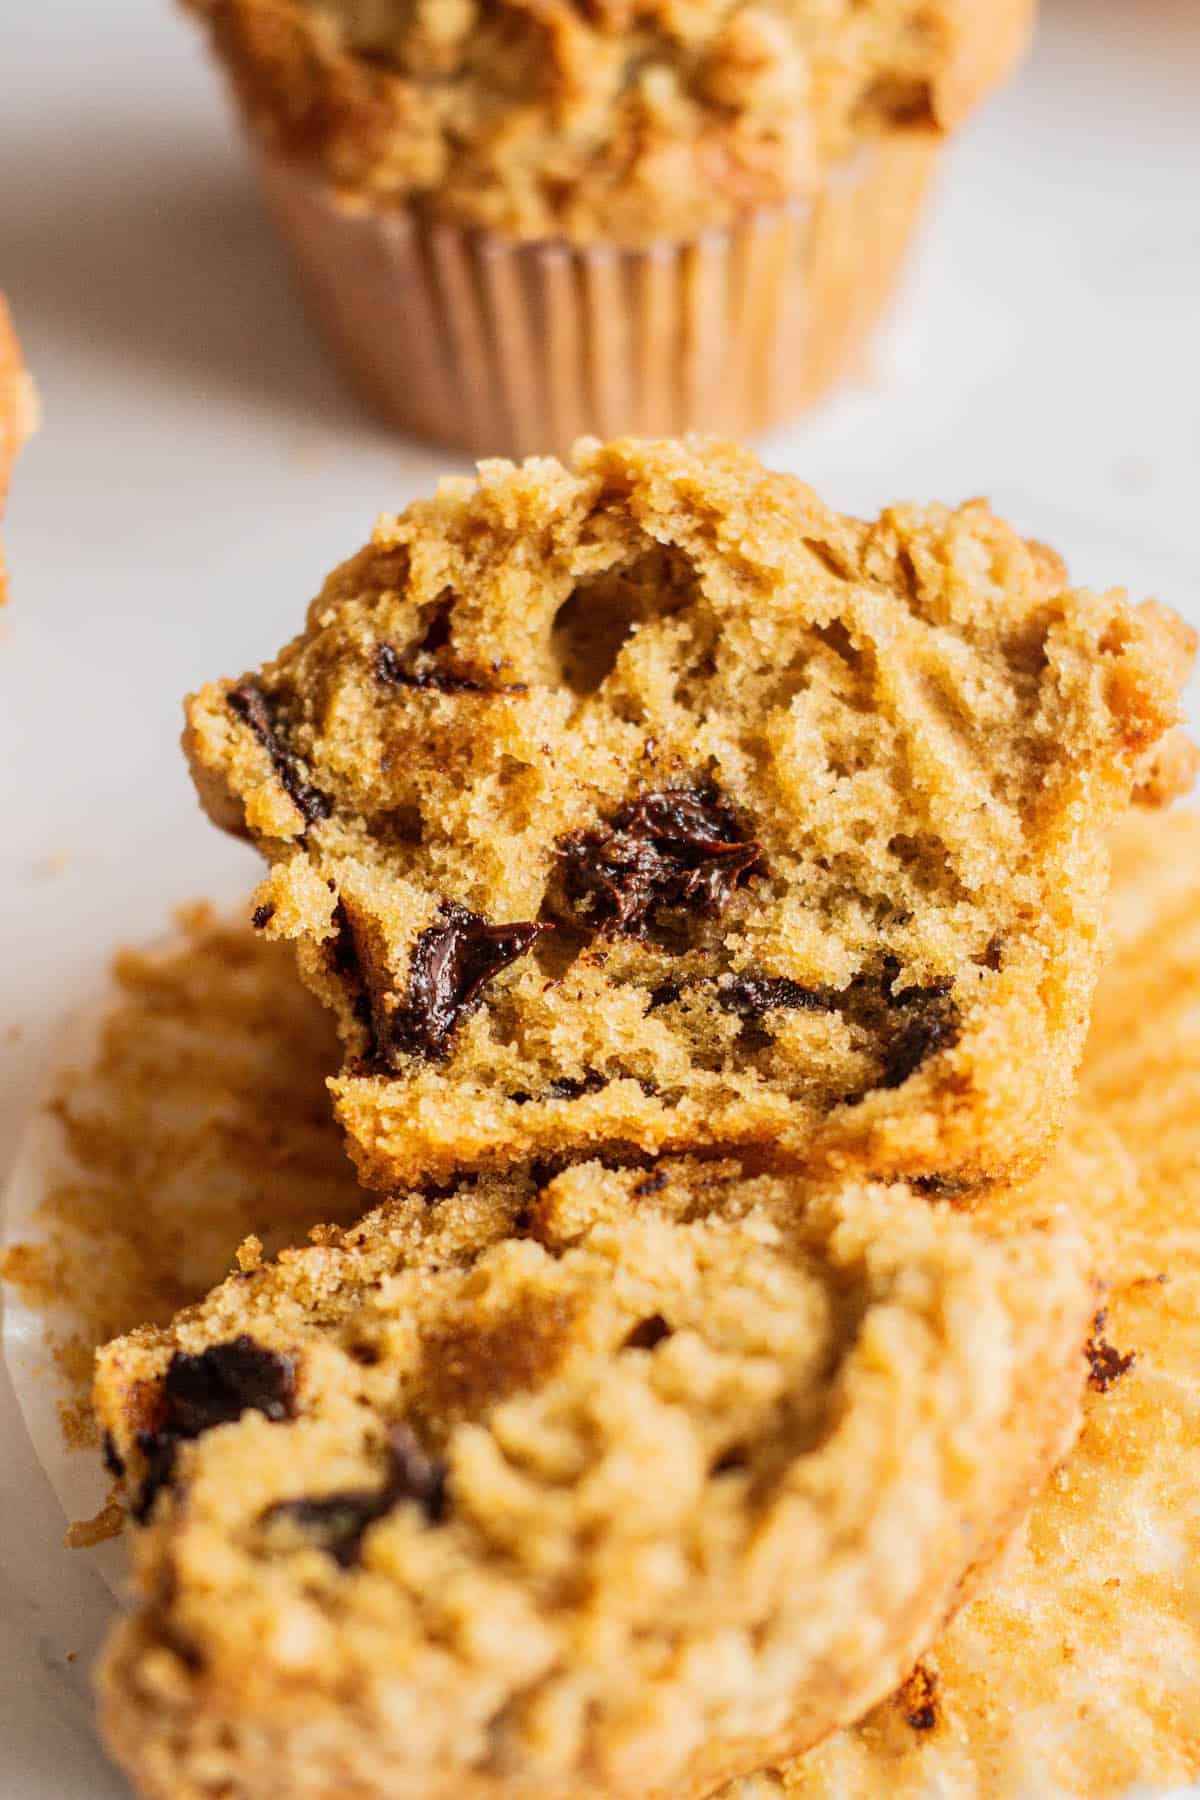 opened muffin with chocolate chunks.